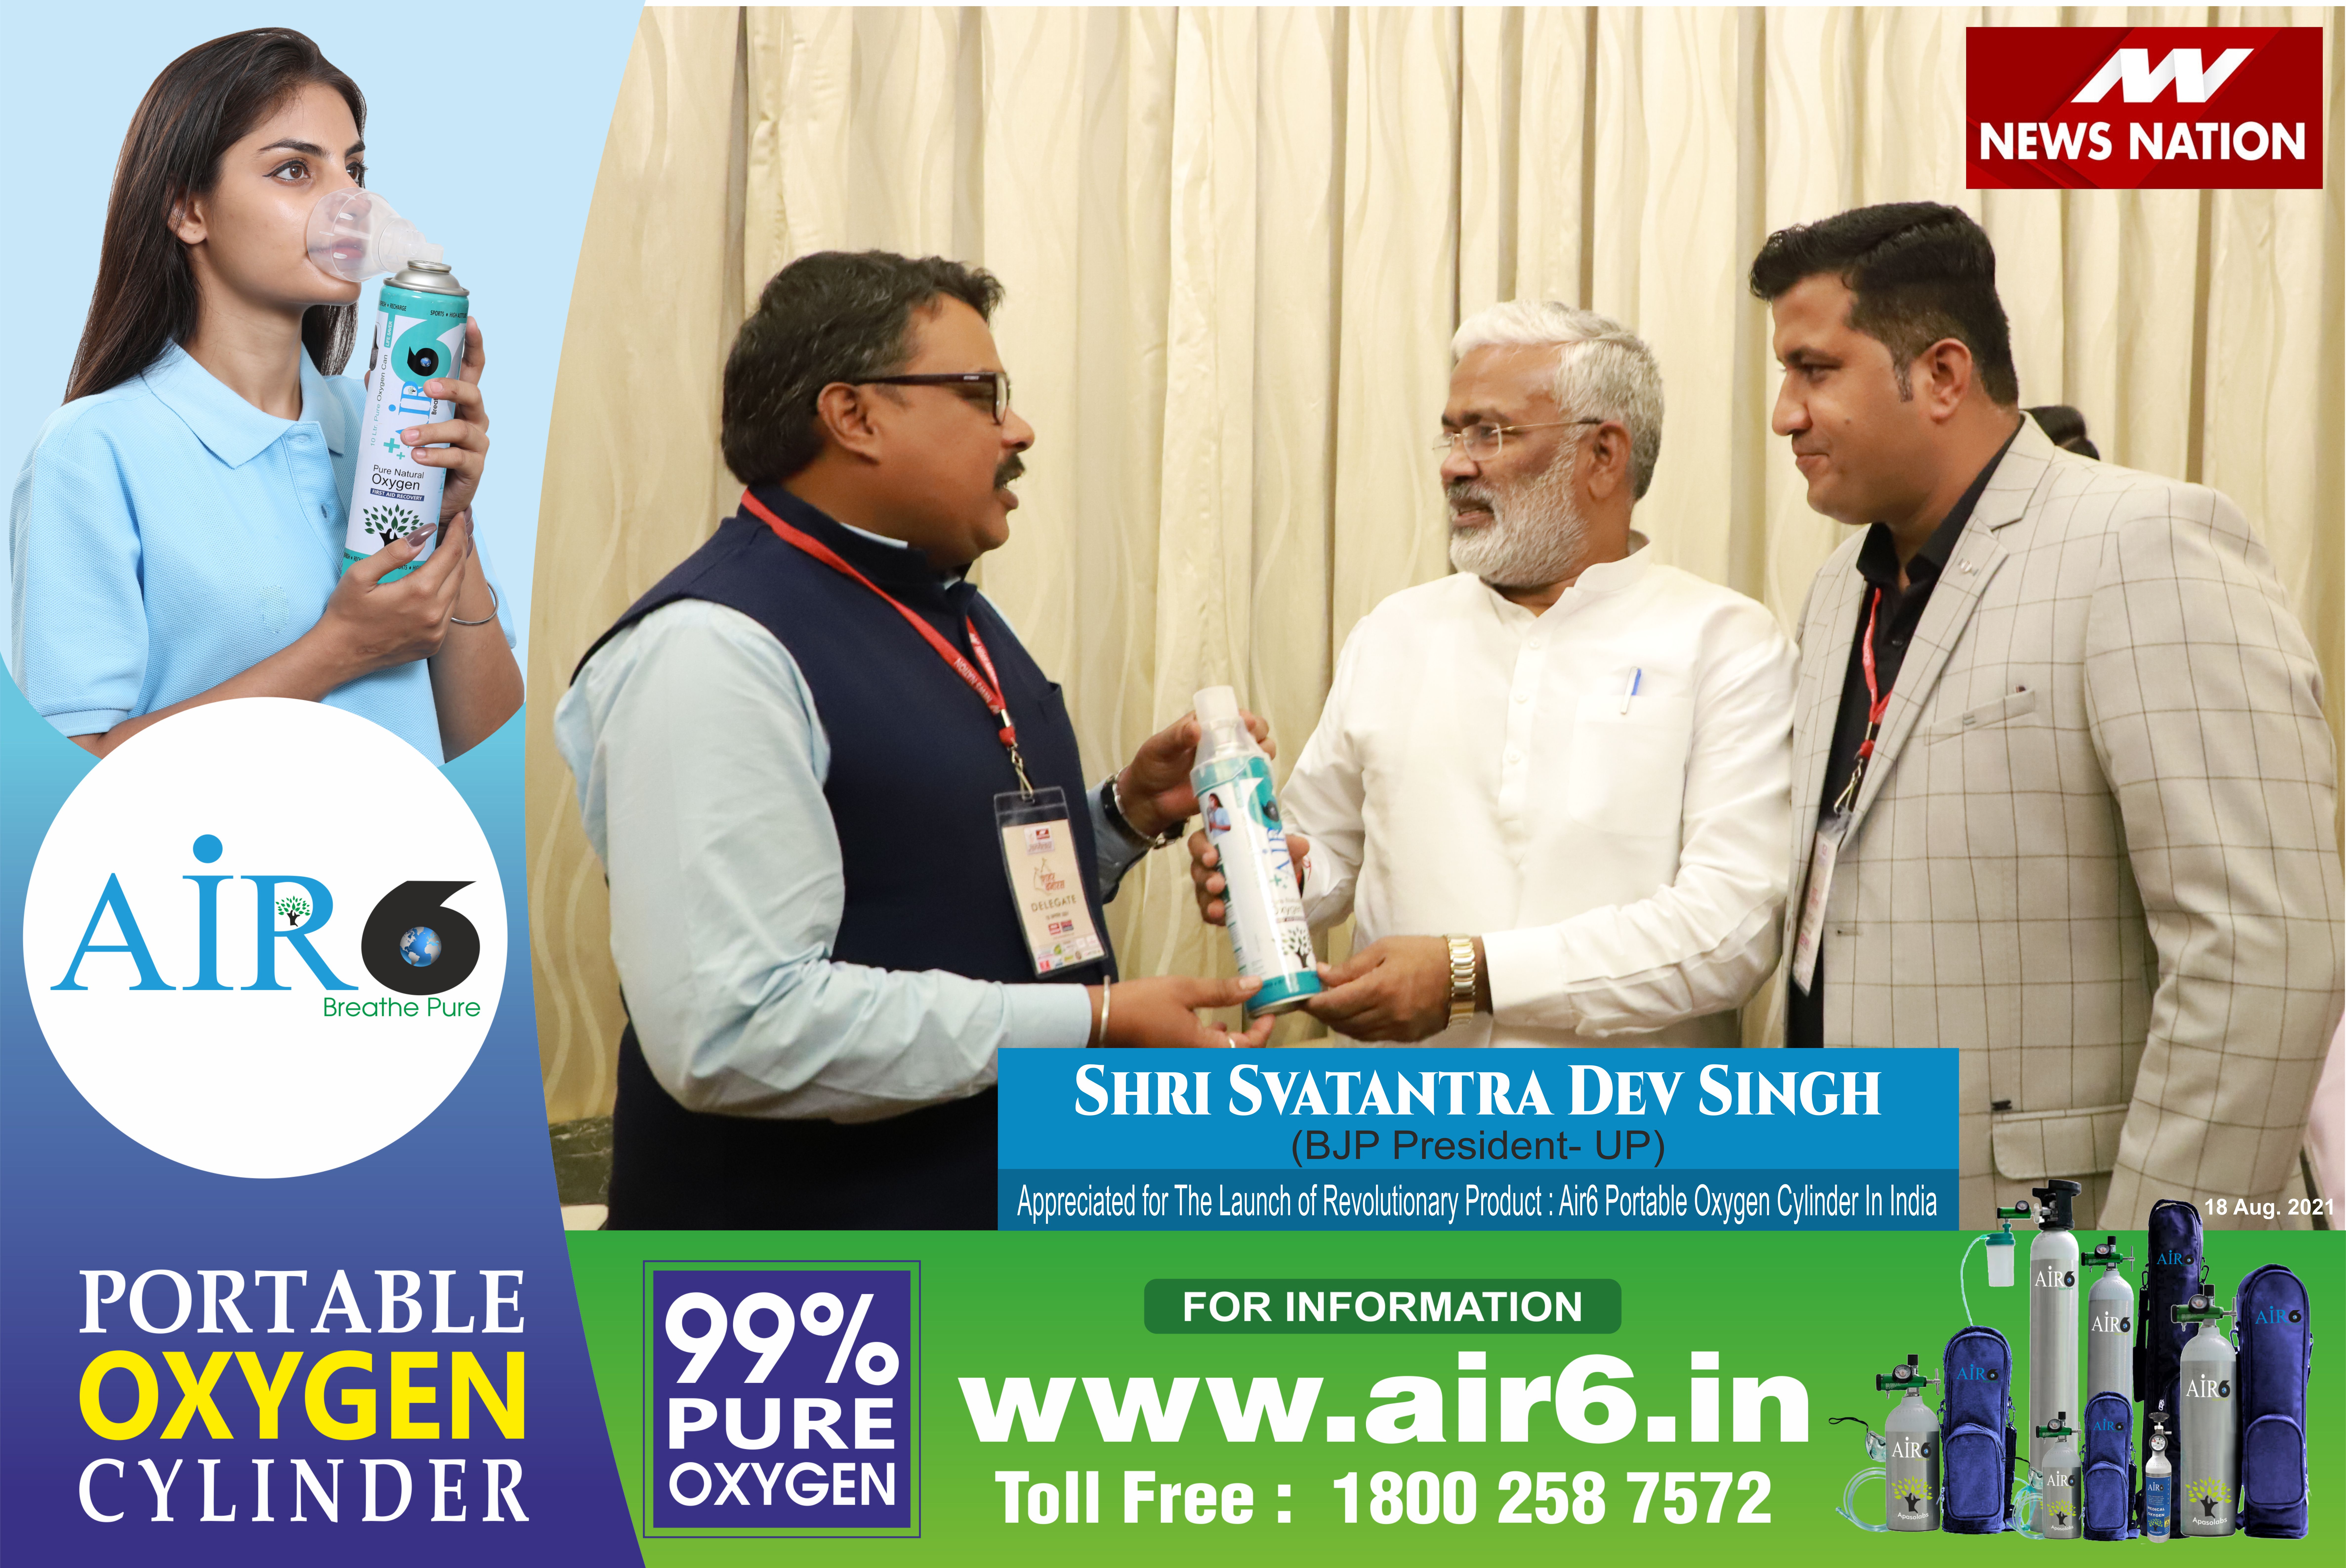 Air6 appreciated by Sri Swatantra Dev Singh (UP BJP President at Delhi during an event organized by News Nation TV)